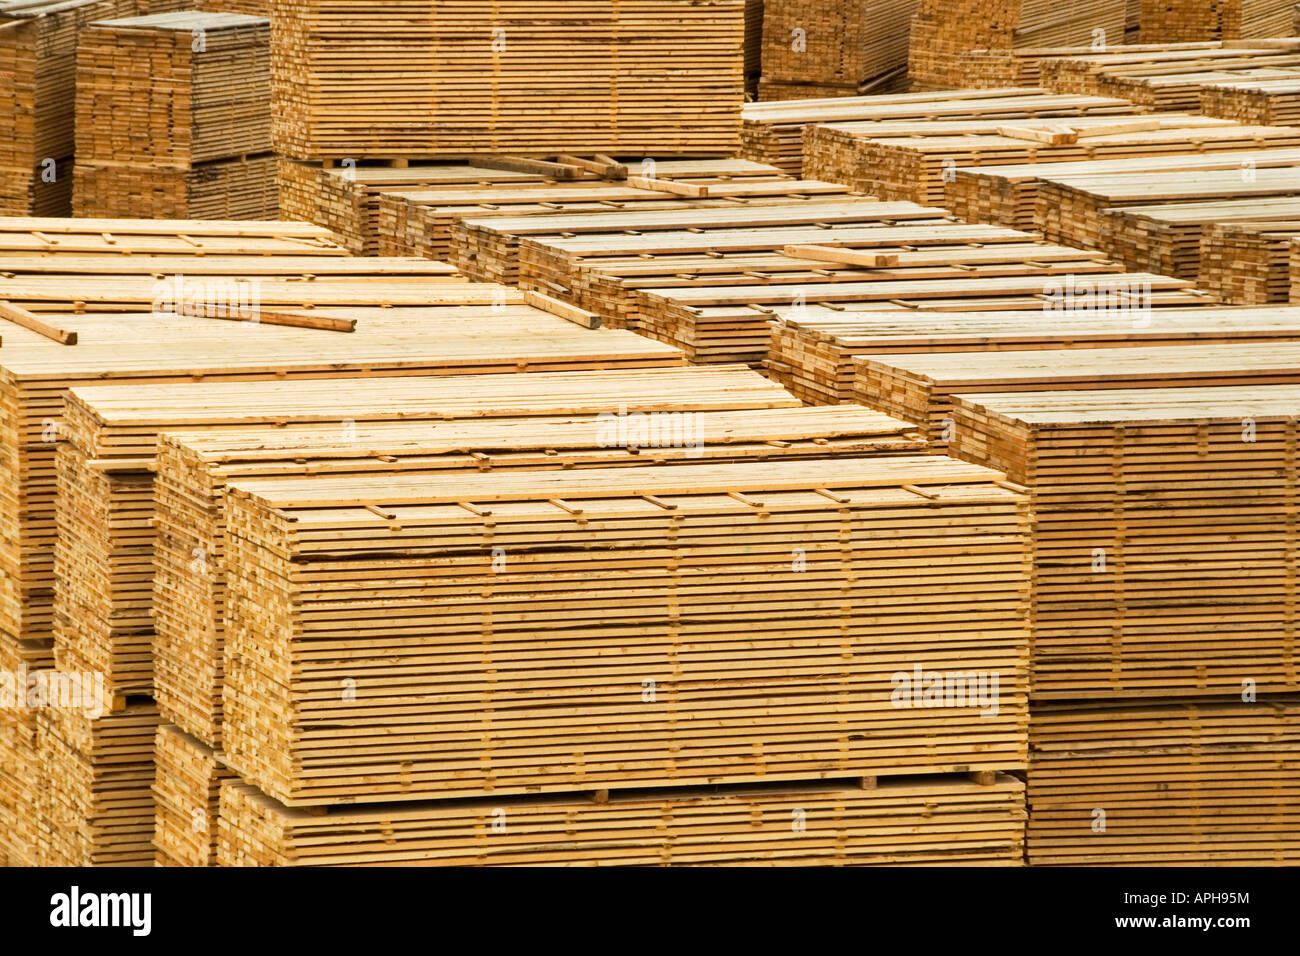 Stacks of lumber at Two-Mile Flat, Quesnel, British Columbia, Canada Stock Photo